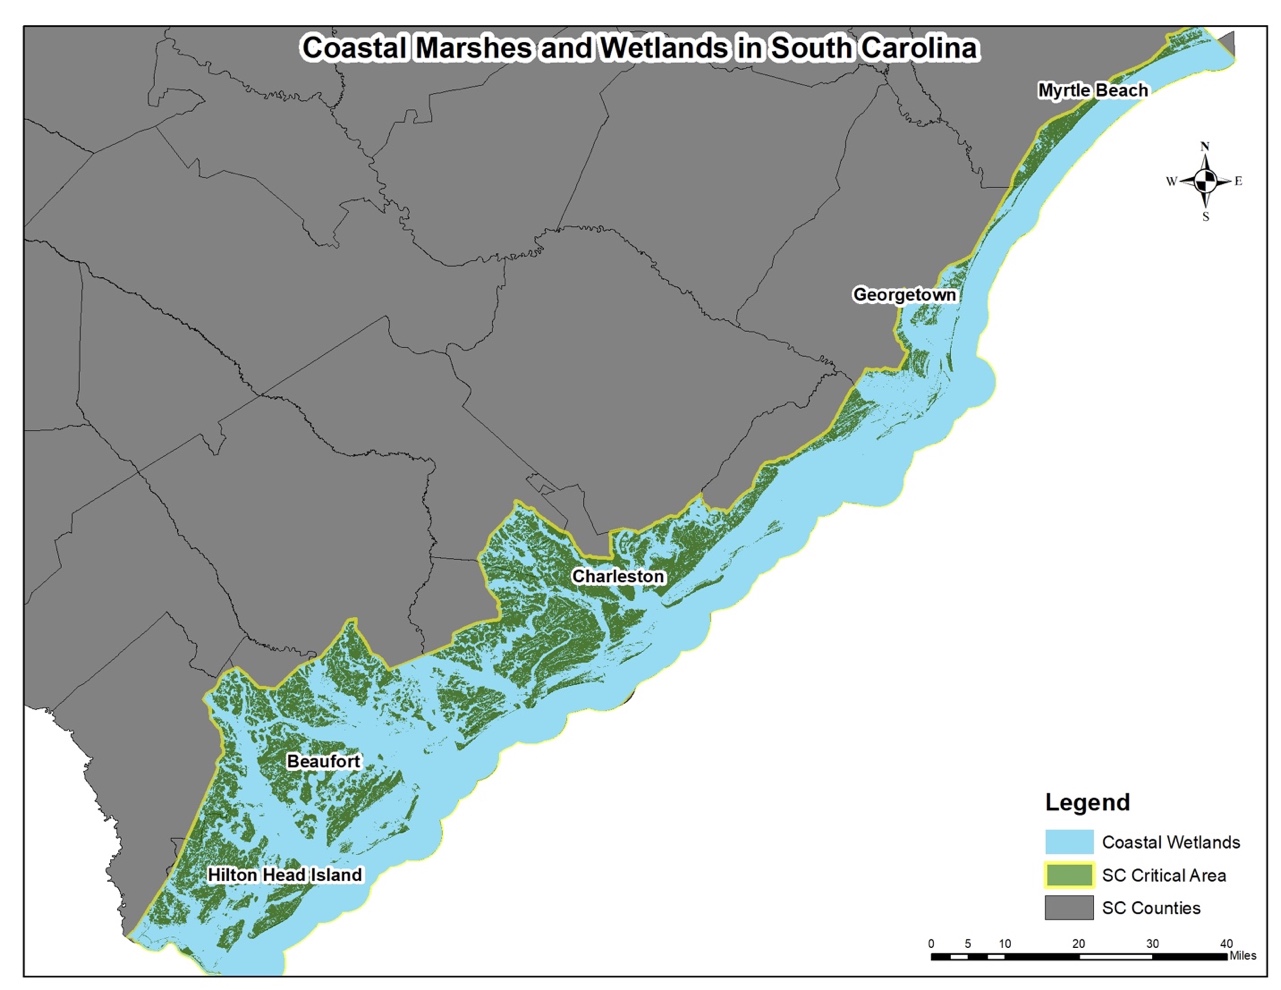 Map legend colors showing South Carolina's coastal marshes and wetlands